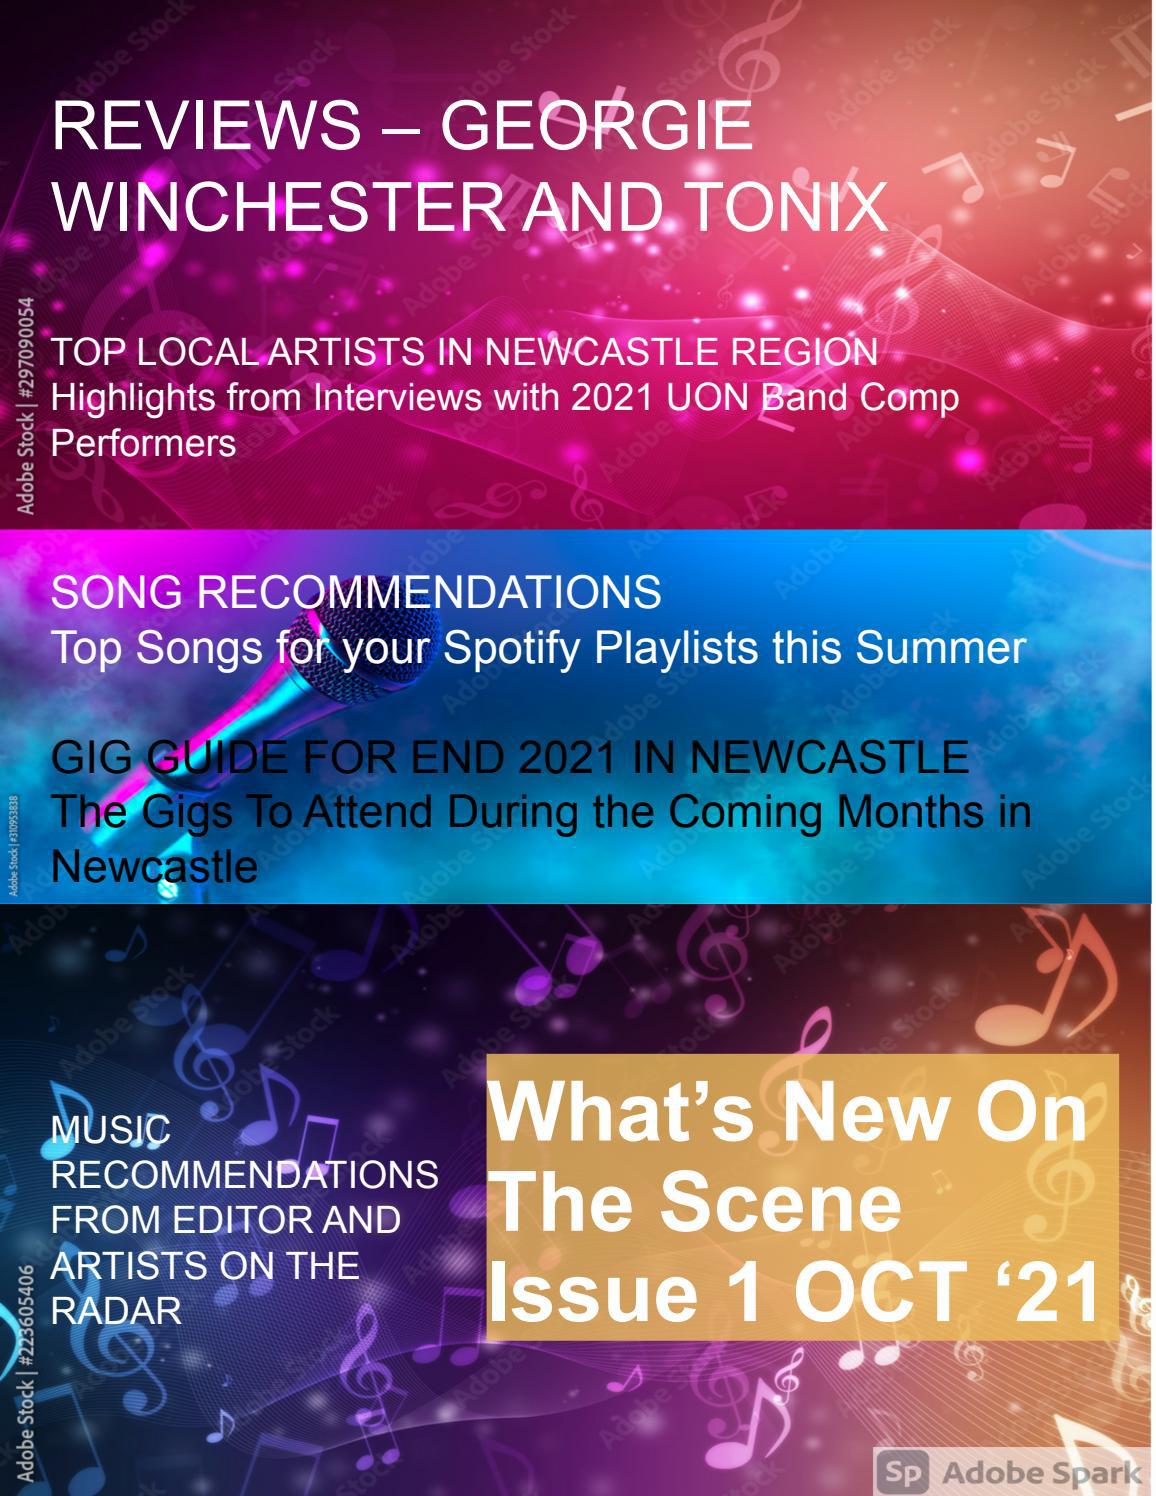 WHAT'S NEW ON THE SCENE ISSUE 1 OCTOBER 2021